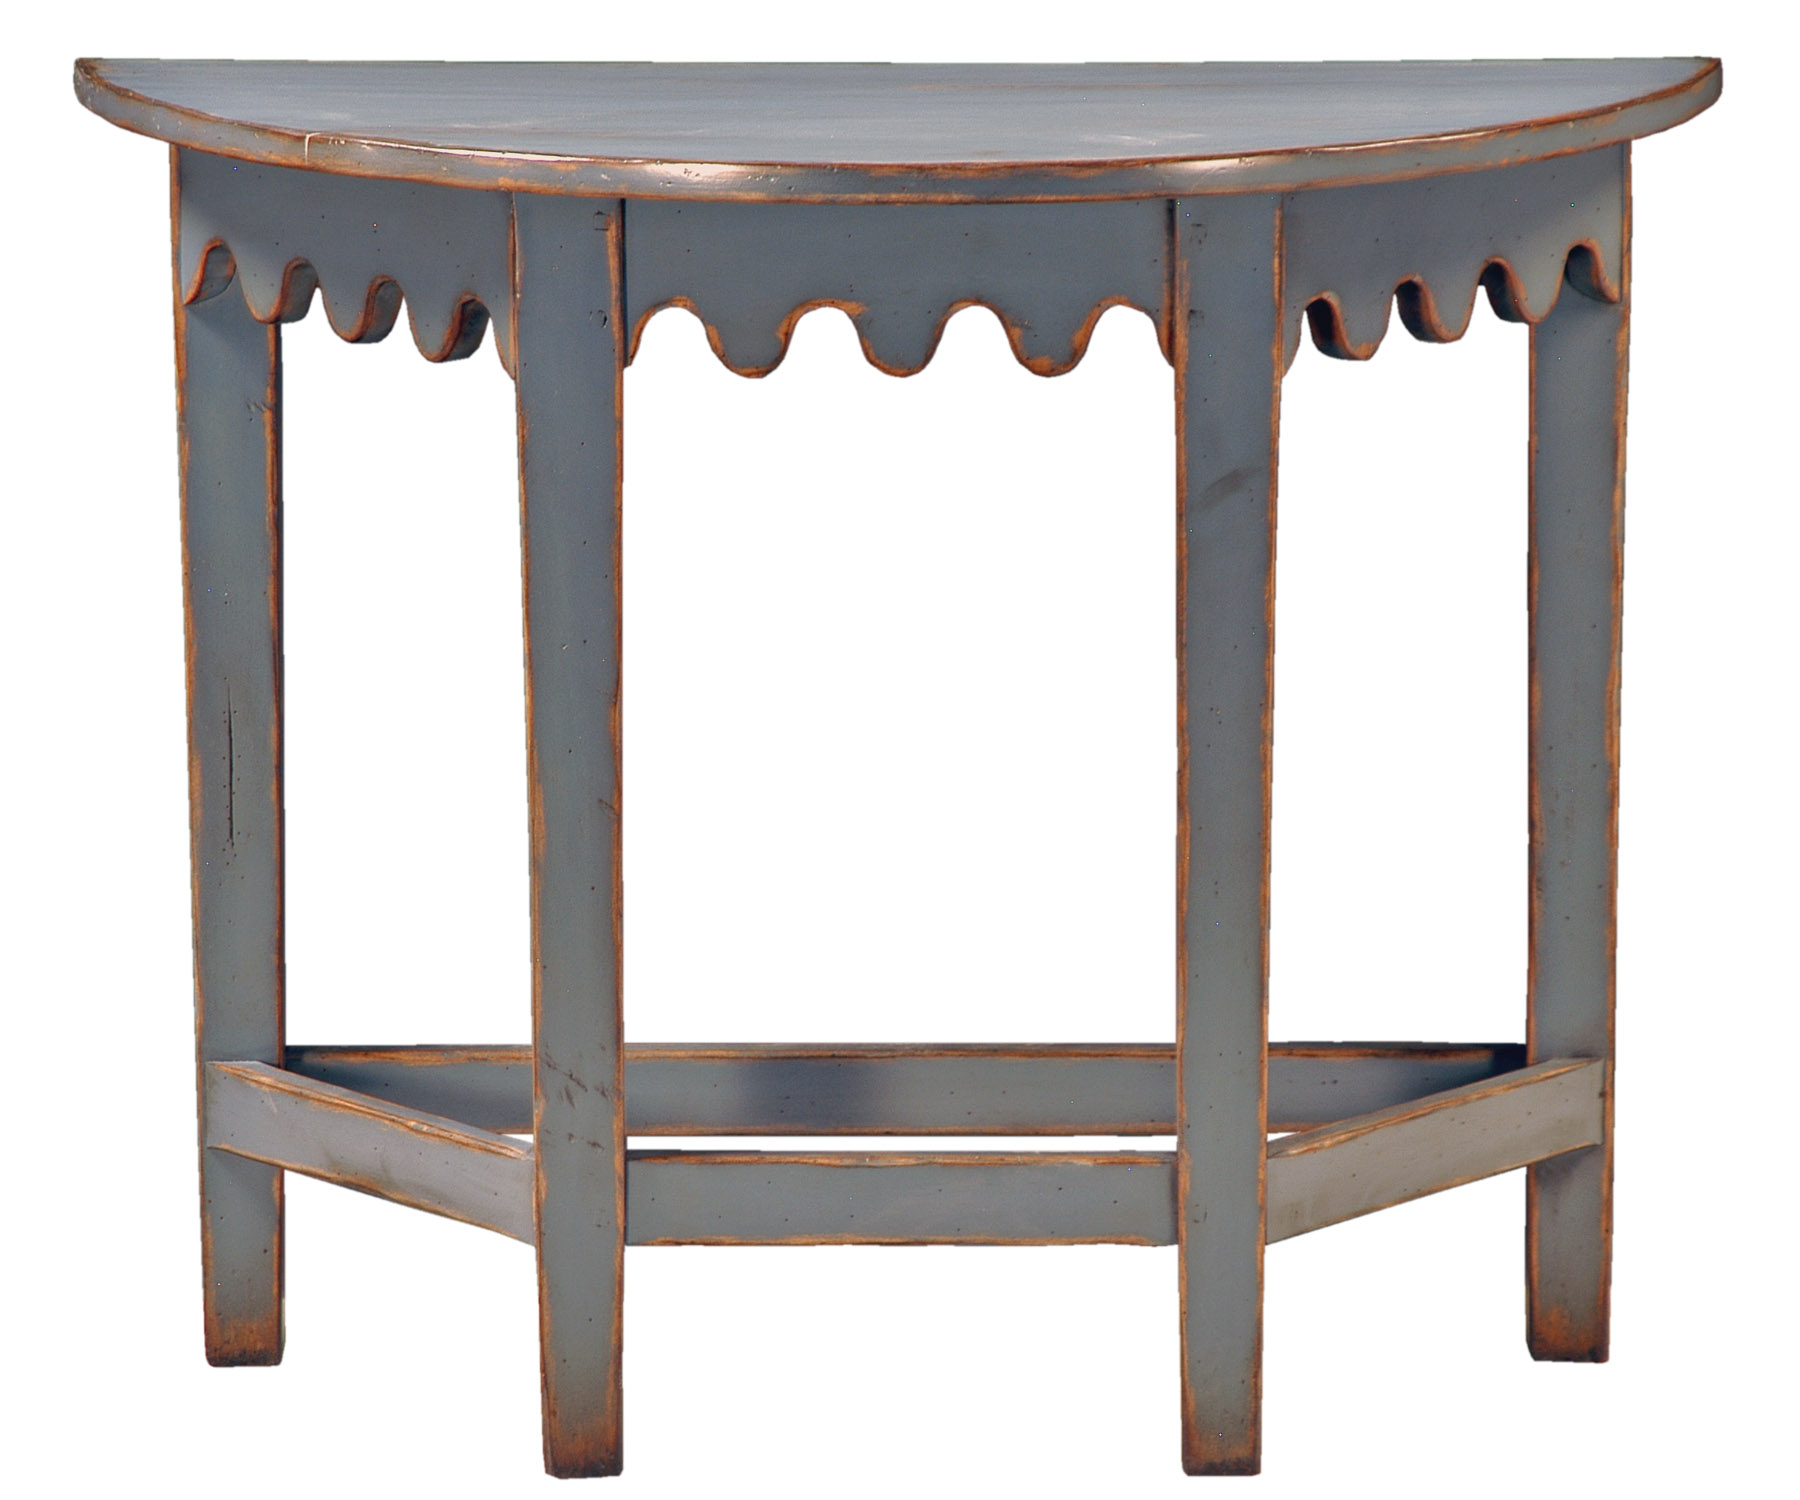 Bonner traditional transitional demilune painted distressed side or end table by Woodland furniture in Idaho Falls